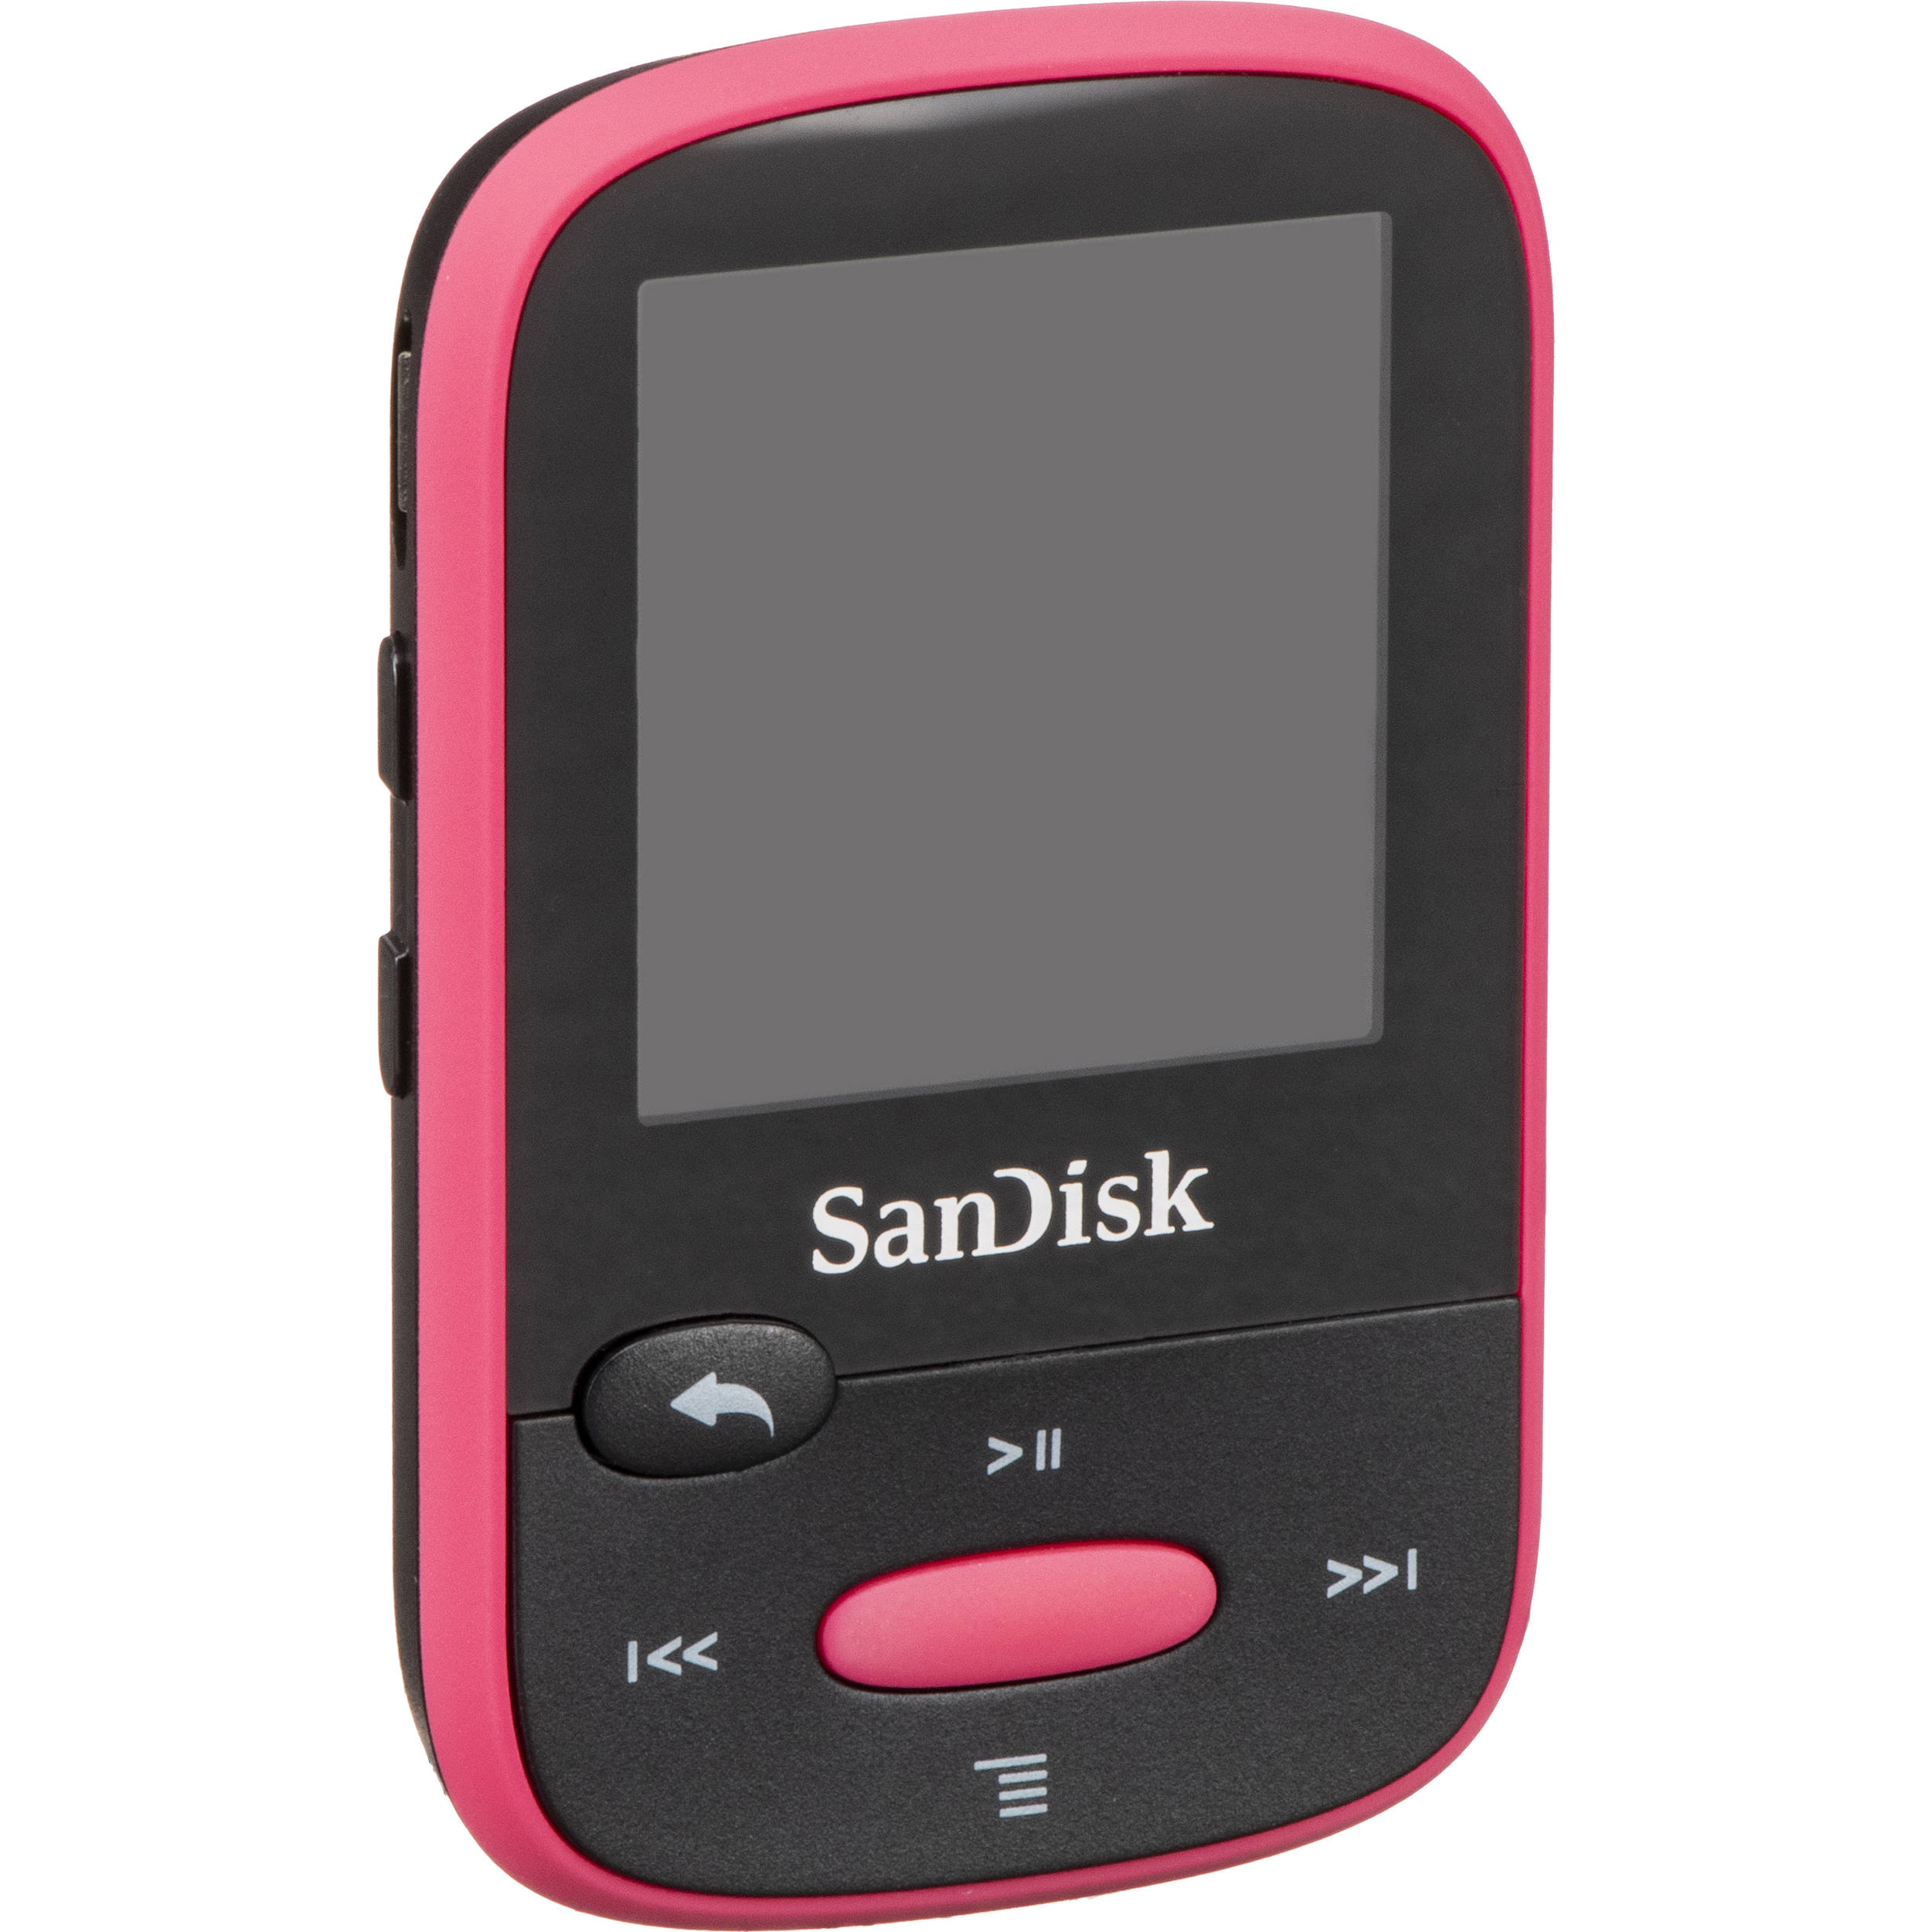 How To Upload An Audiobook To Sandisk MP3 Player